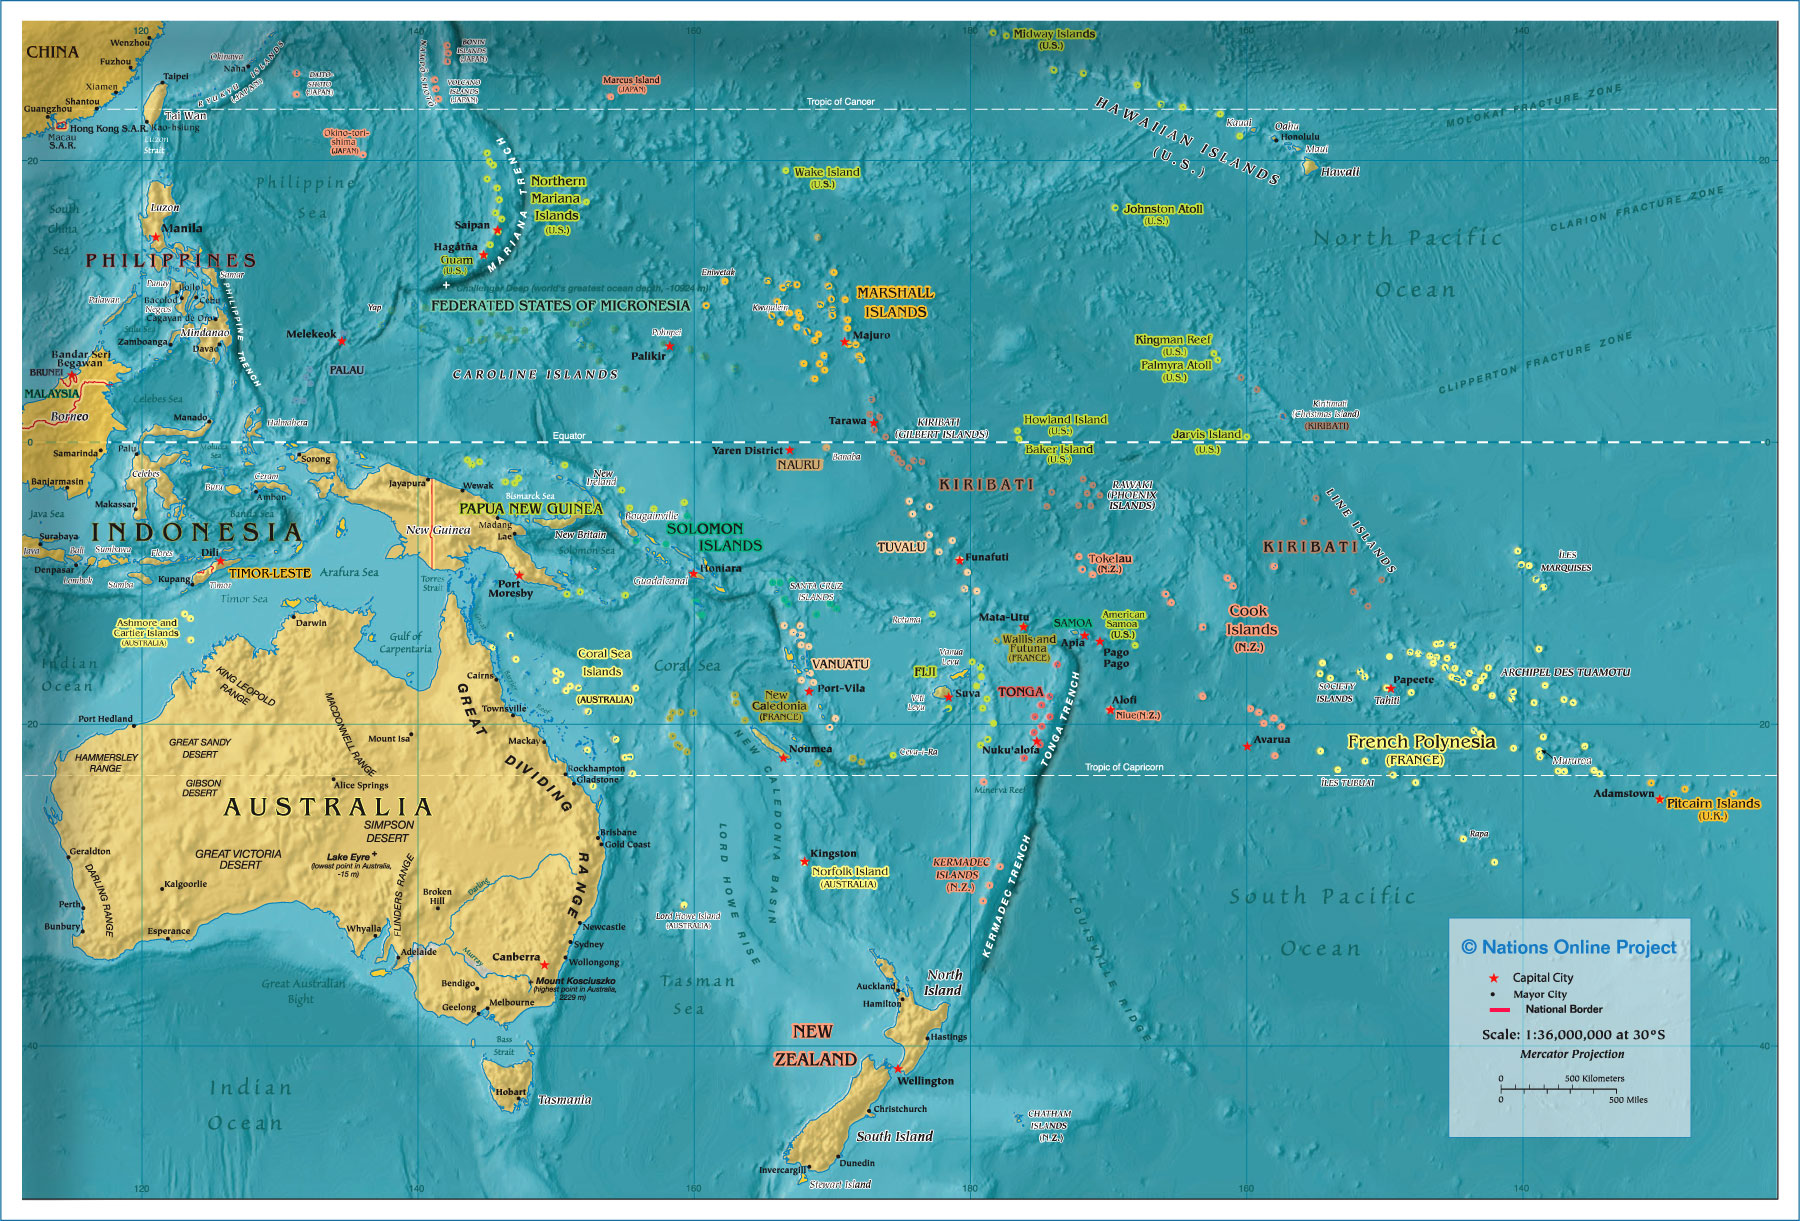 Reference Map of Oceania/Australia